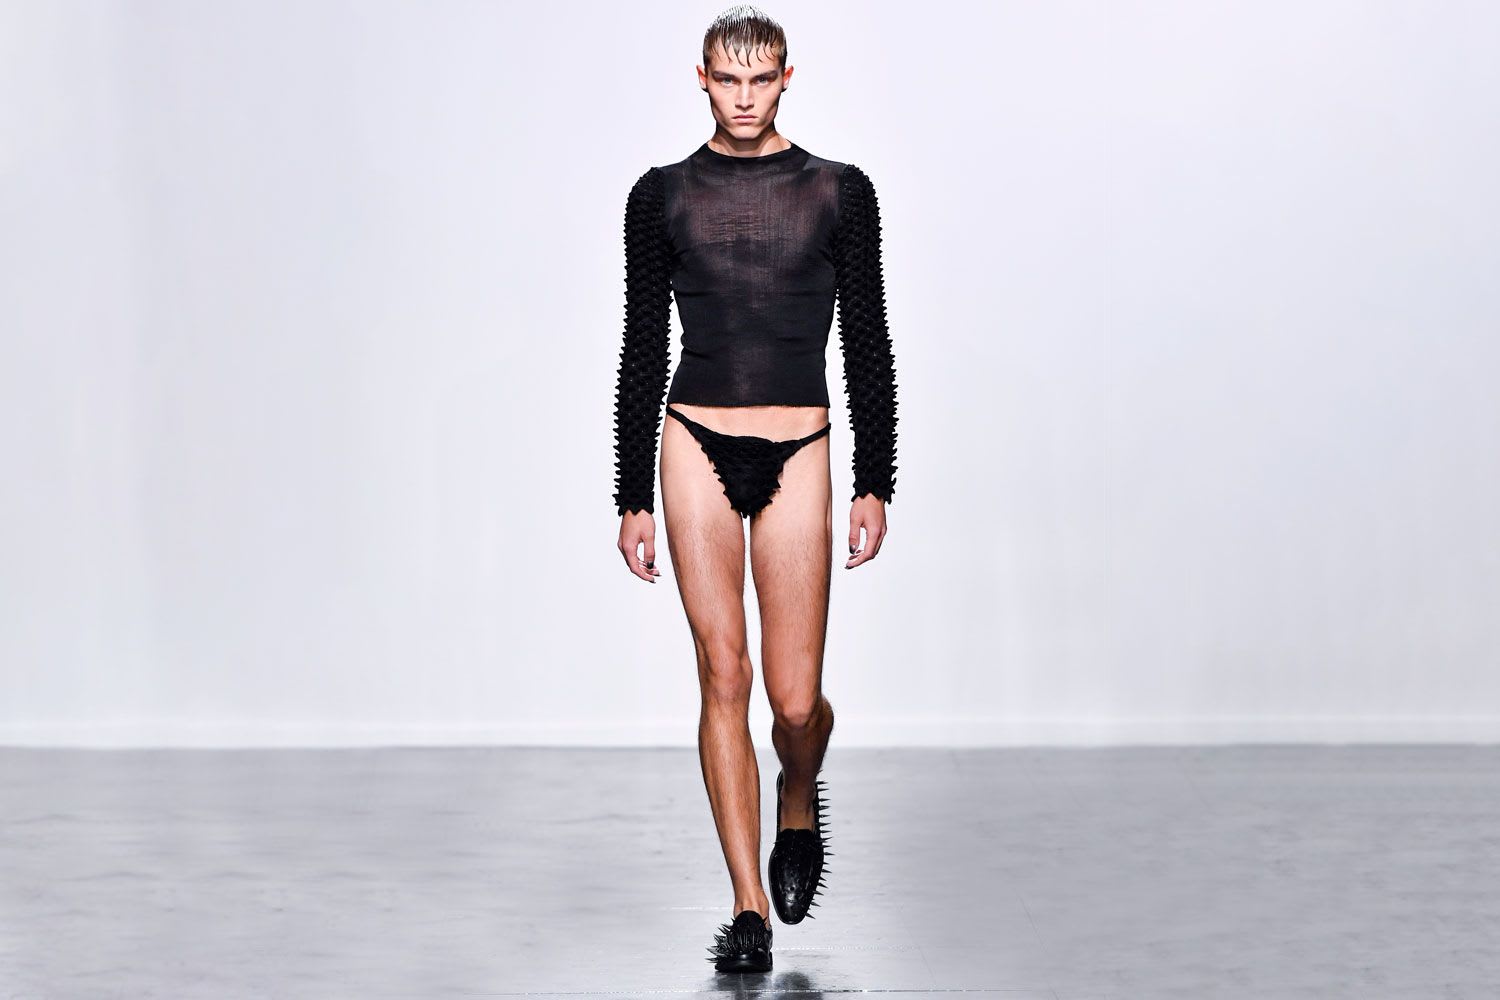 Dare to bare it all! Bare bums were LFW’s biggest trend